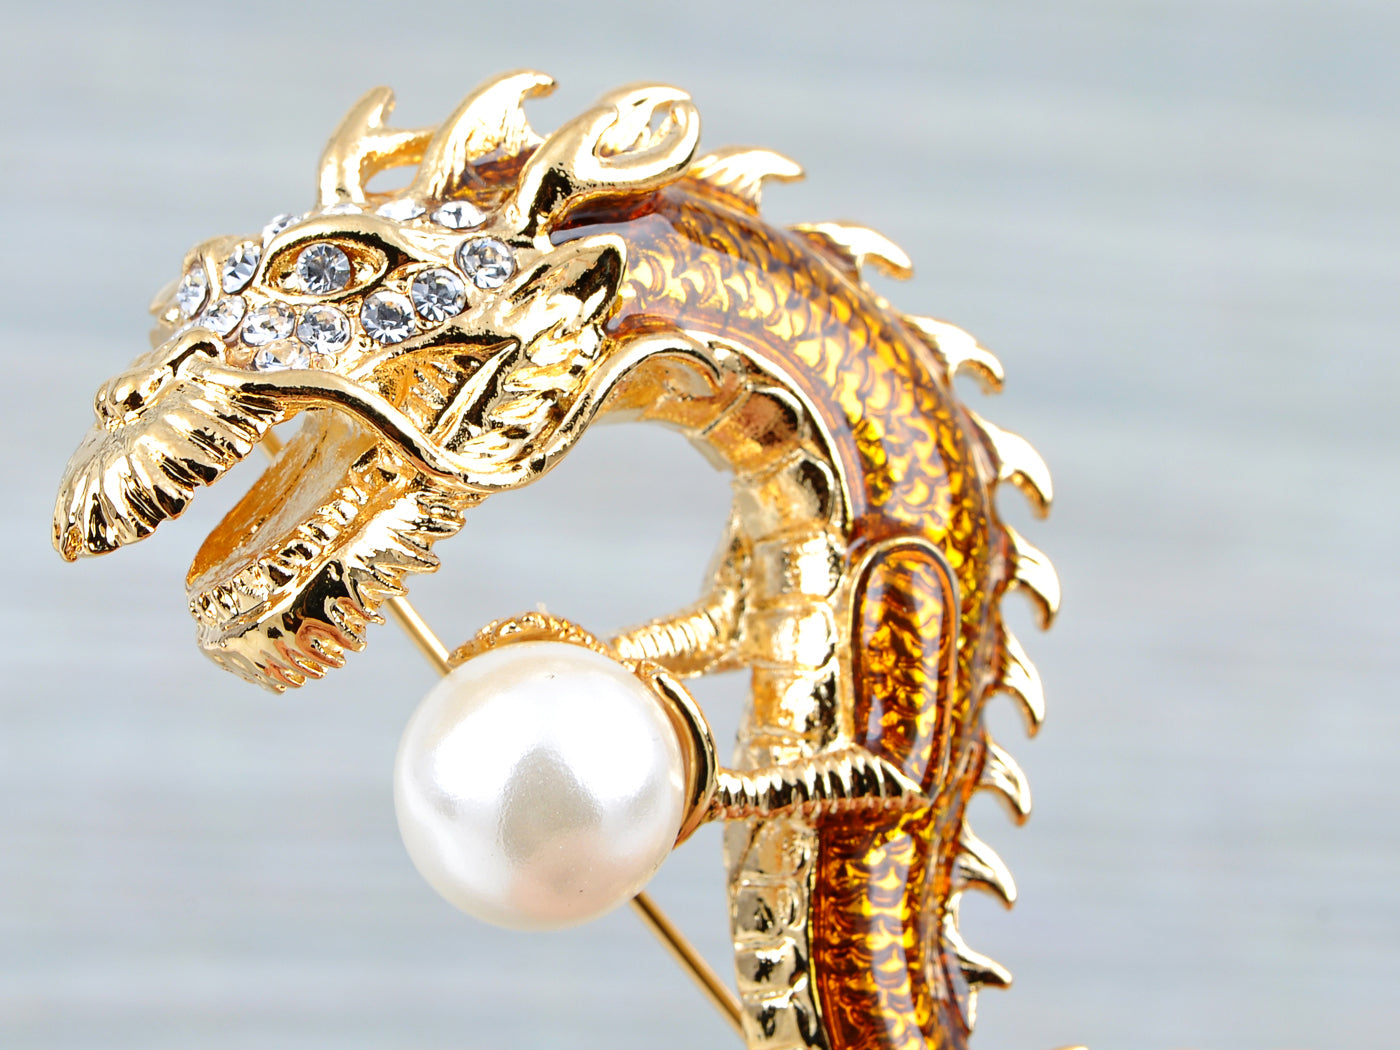 Elements Majestic Serpent Dragon Holding Pearl Pin Brooch